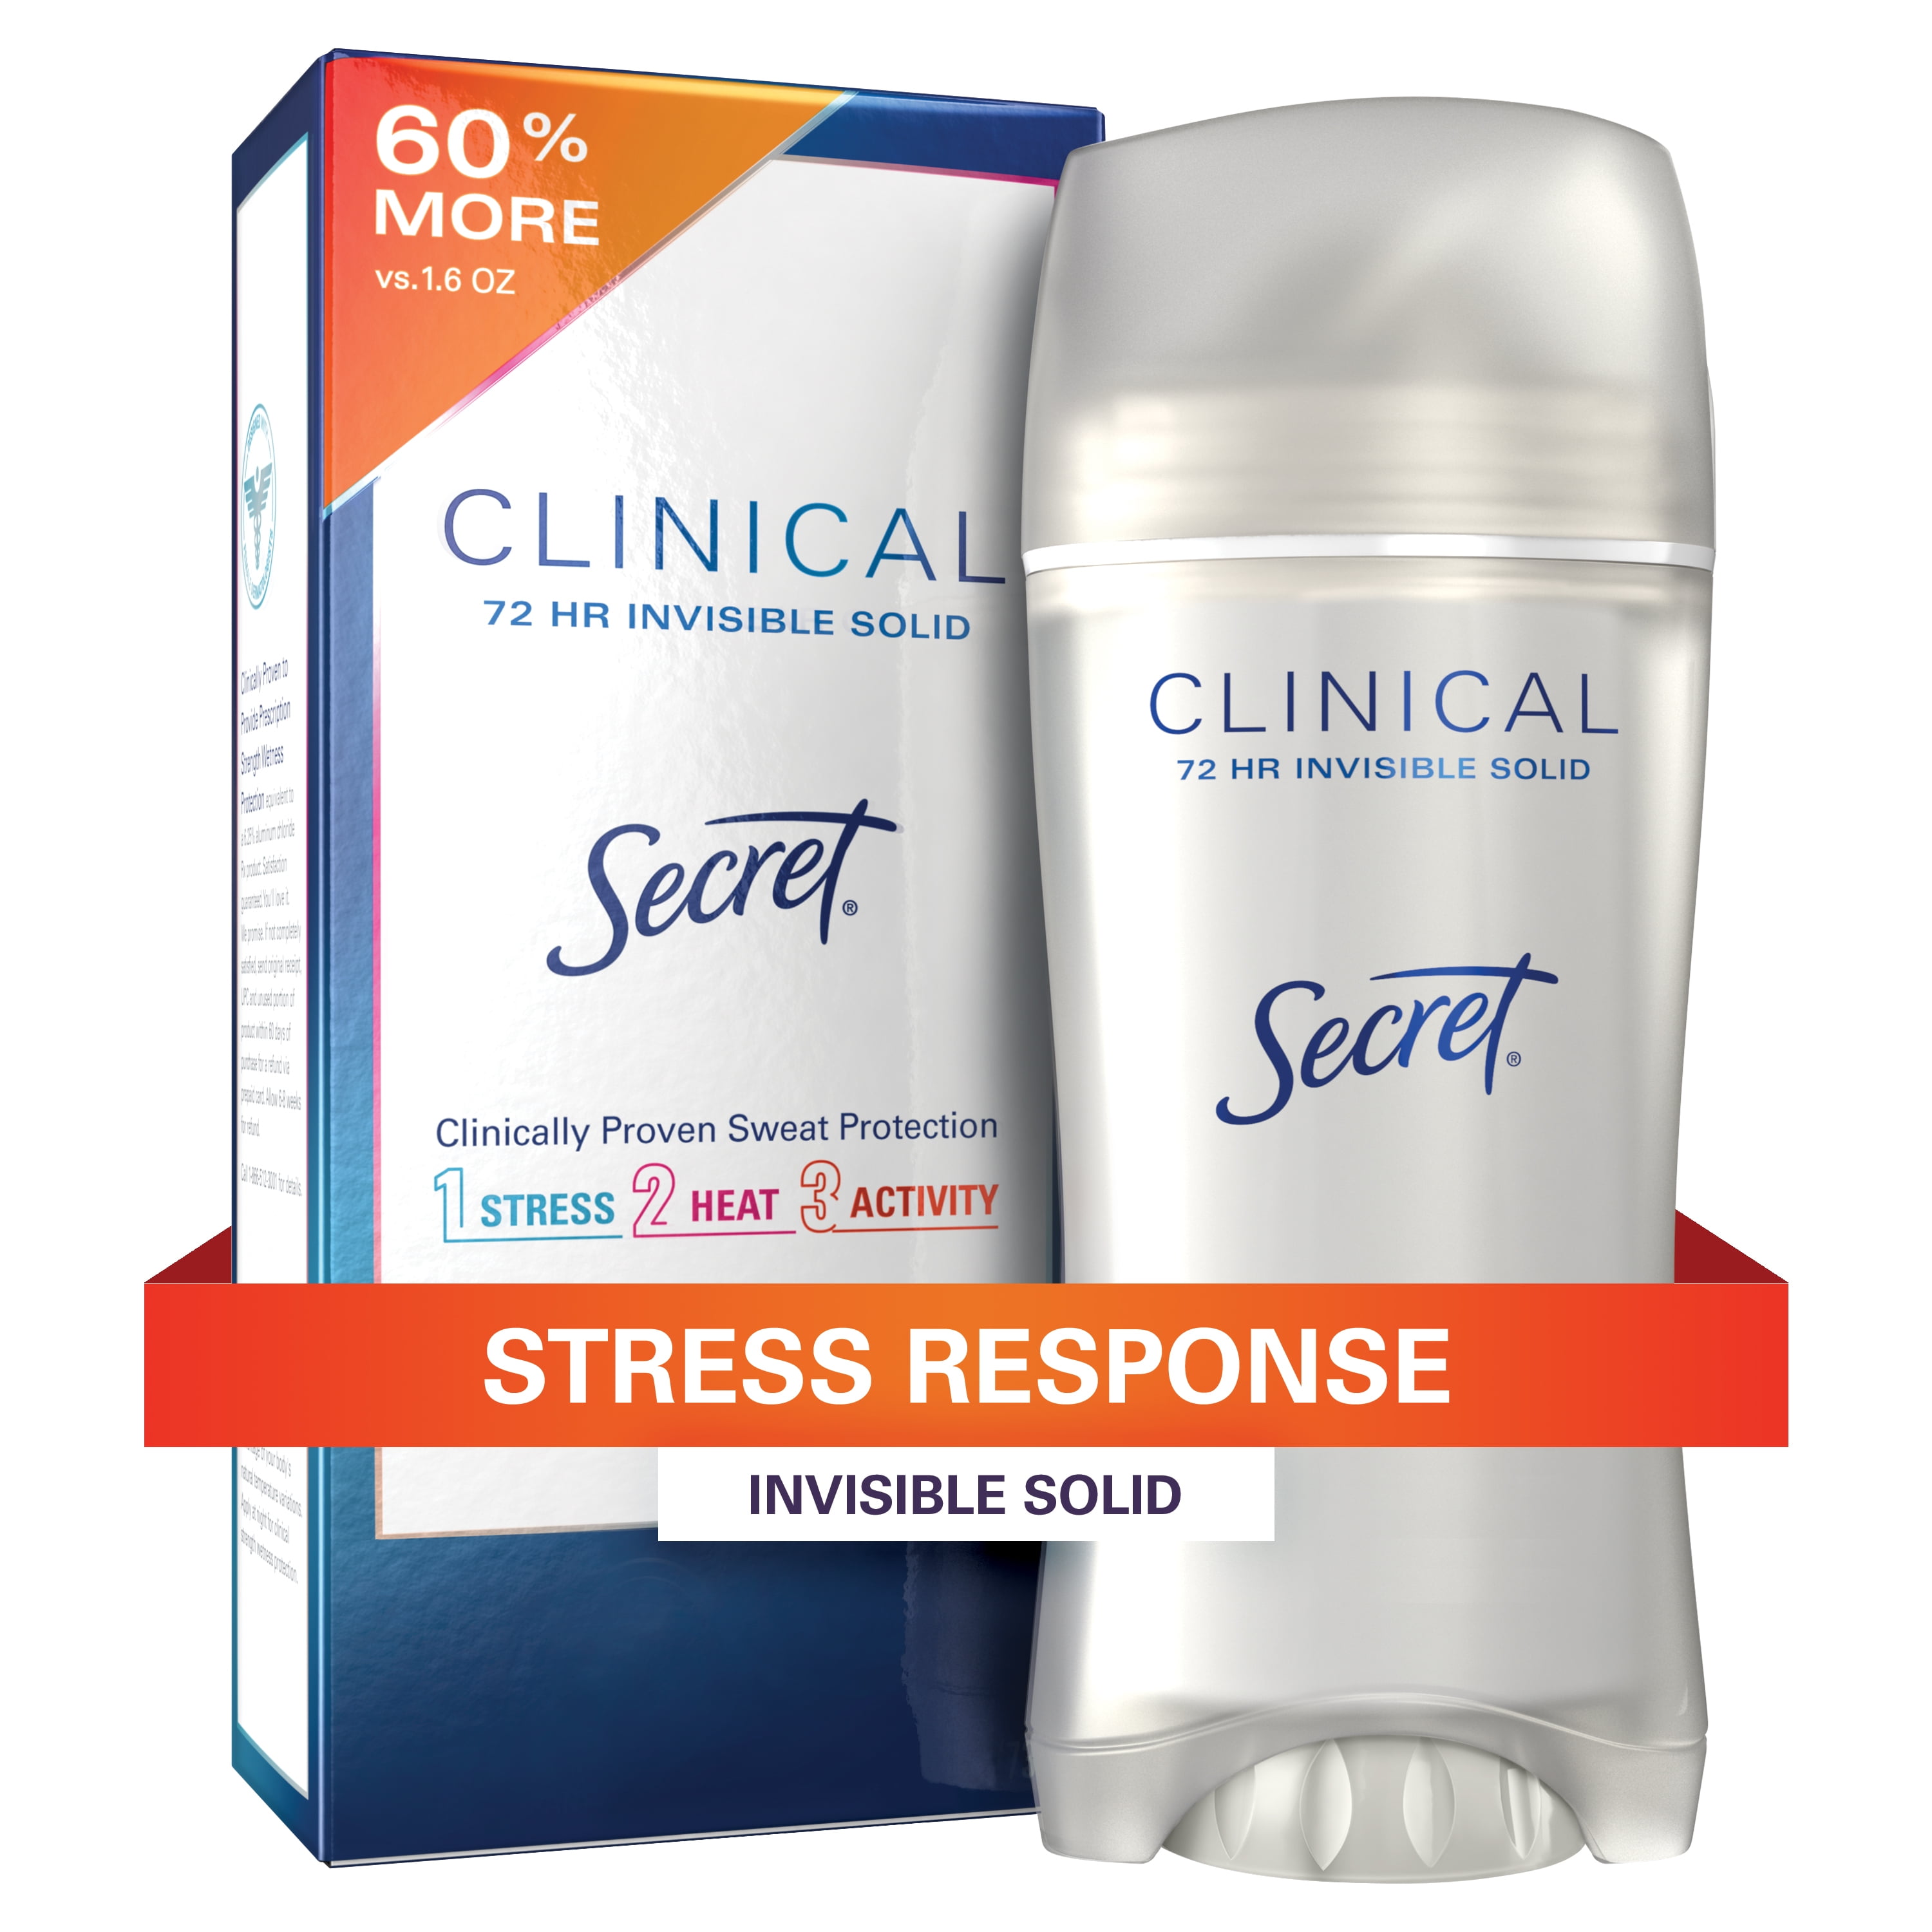 Secret Clinical Strength Invisible Solid Antiperspirant and Deodorant for Women, Stress Response, 2.6 oz